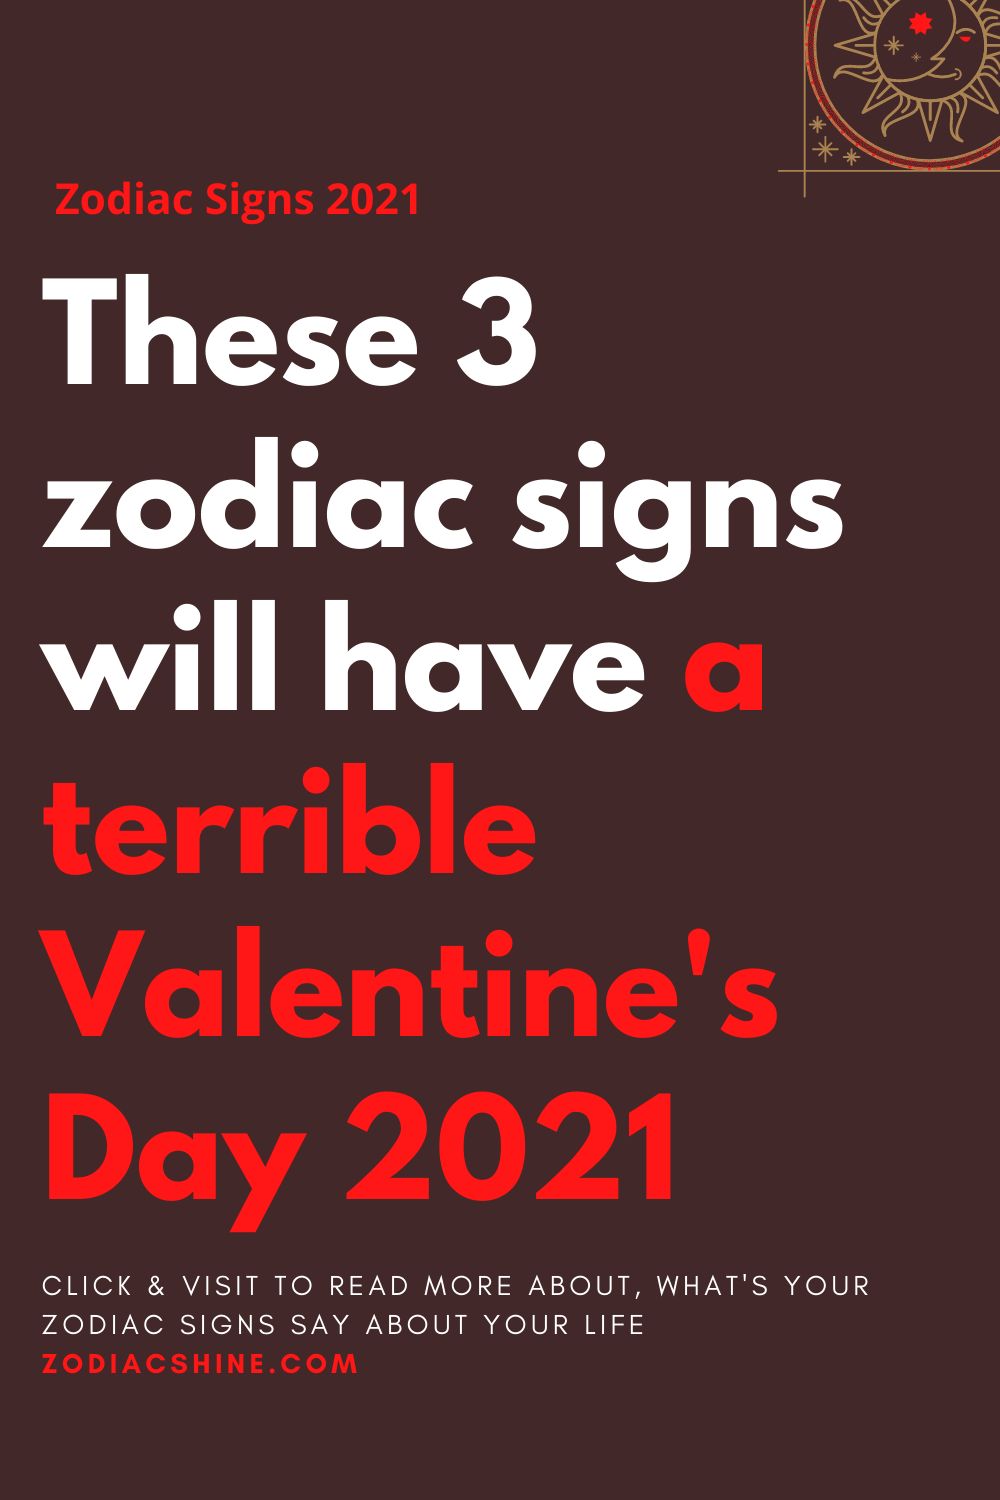 These 3 zodiac signs will have a terrible Valentine's Day 2021